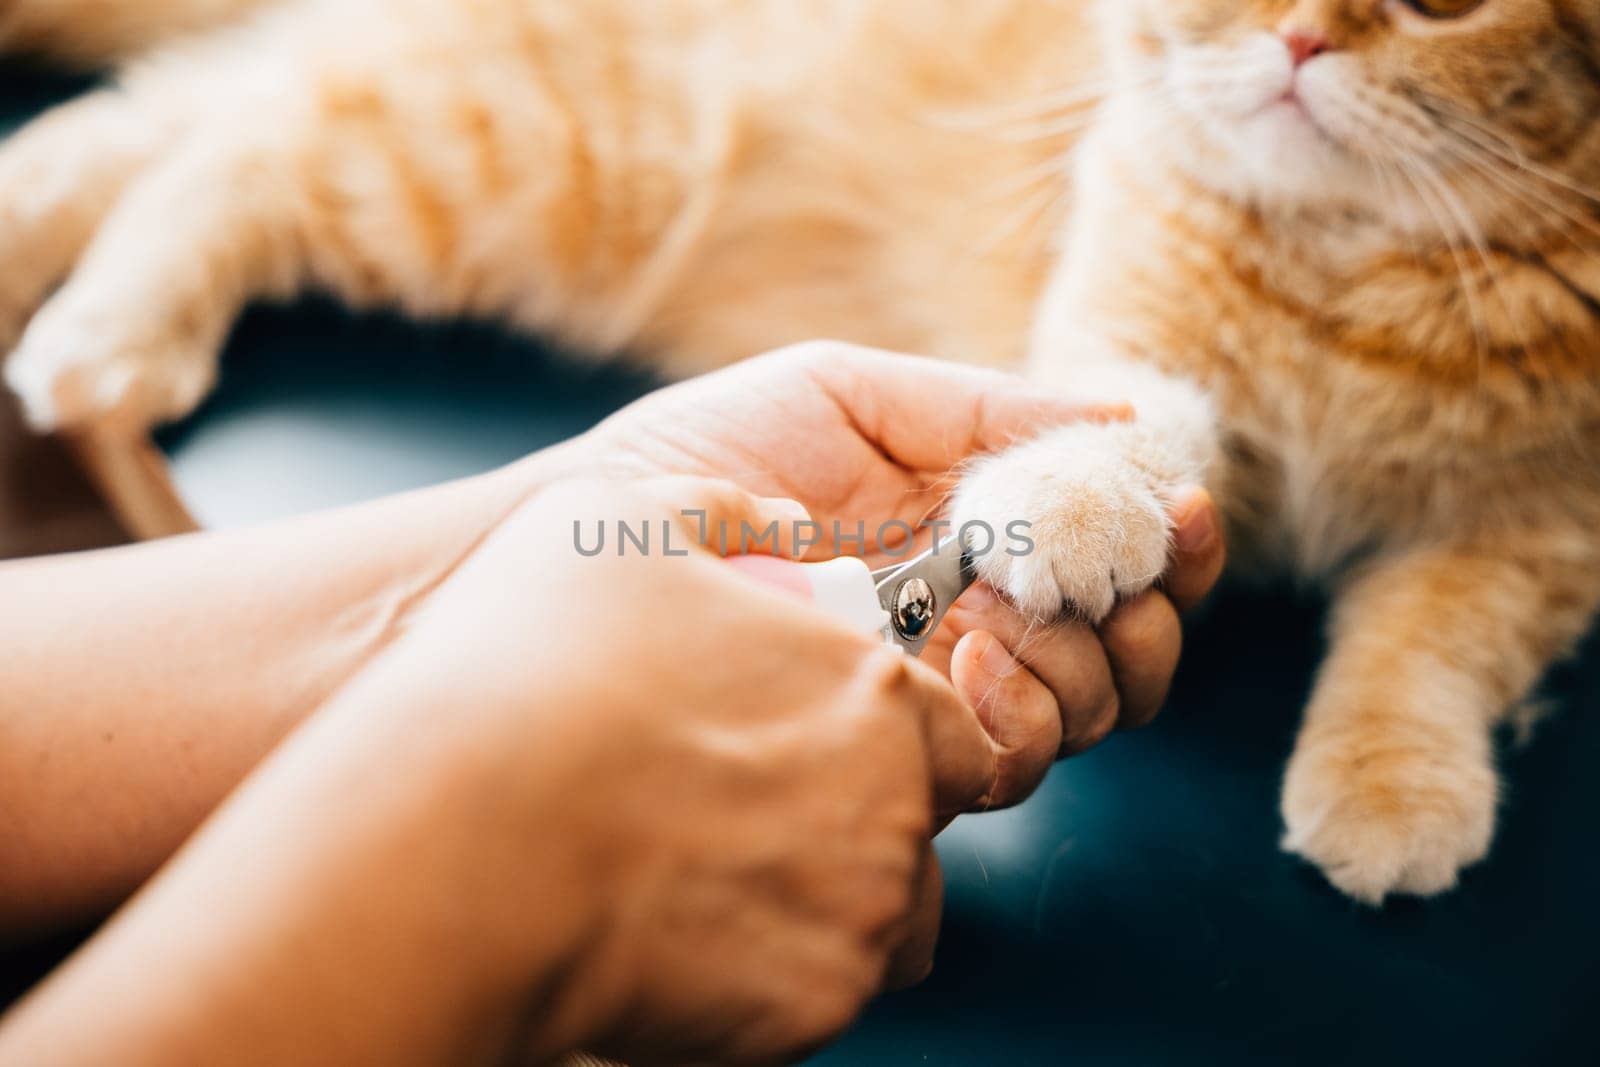 Expert nail trimming for cats by a skilled woman, ensuring the Scottish Fold cat's claws are well-maintained. A close-up view captures the careful approach to pet care, with an emphasis on hygiene.